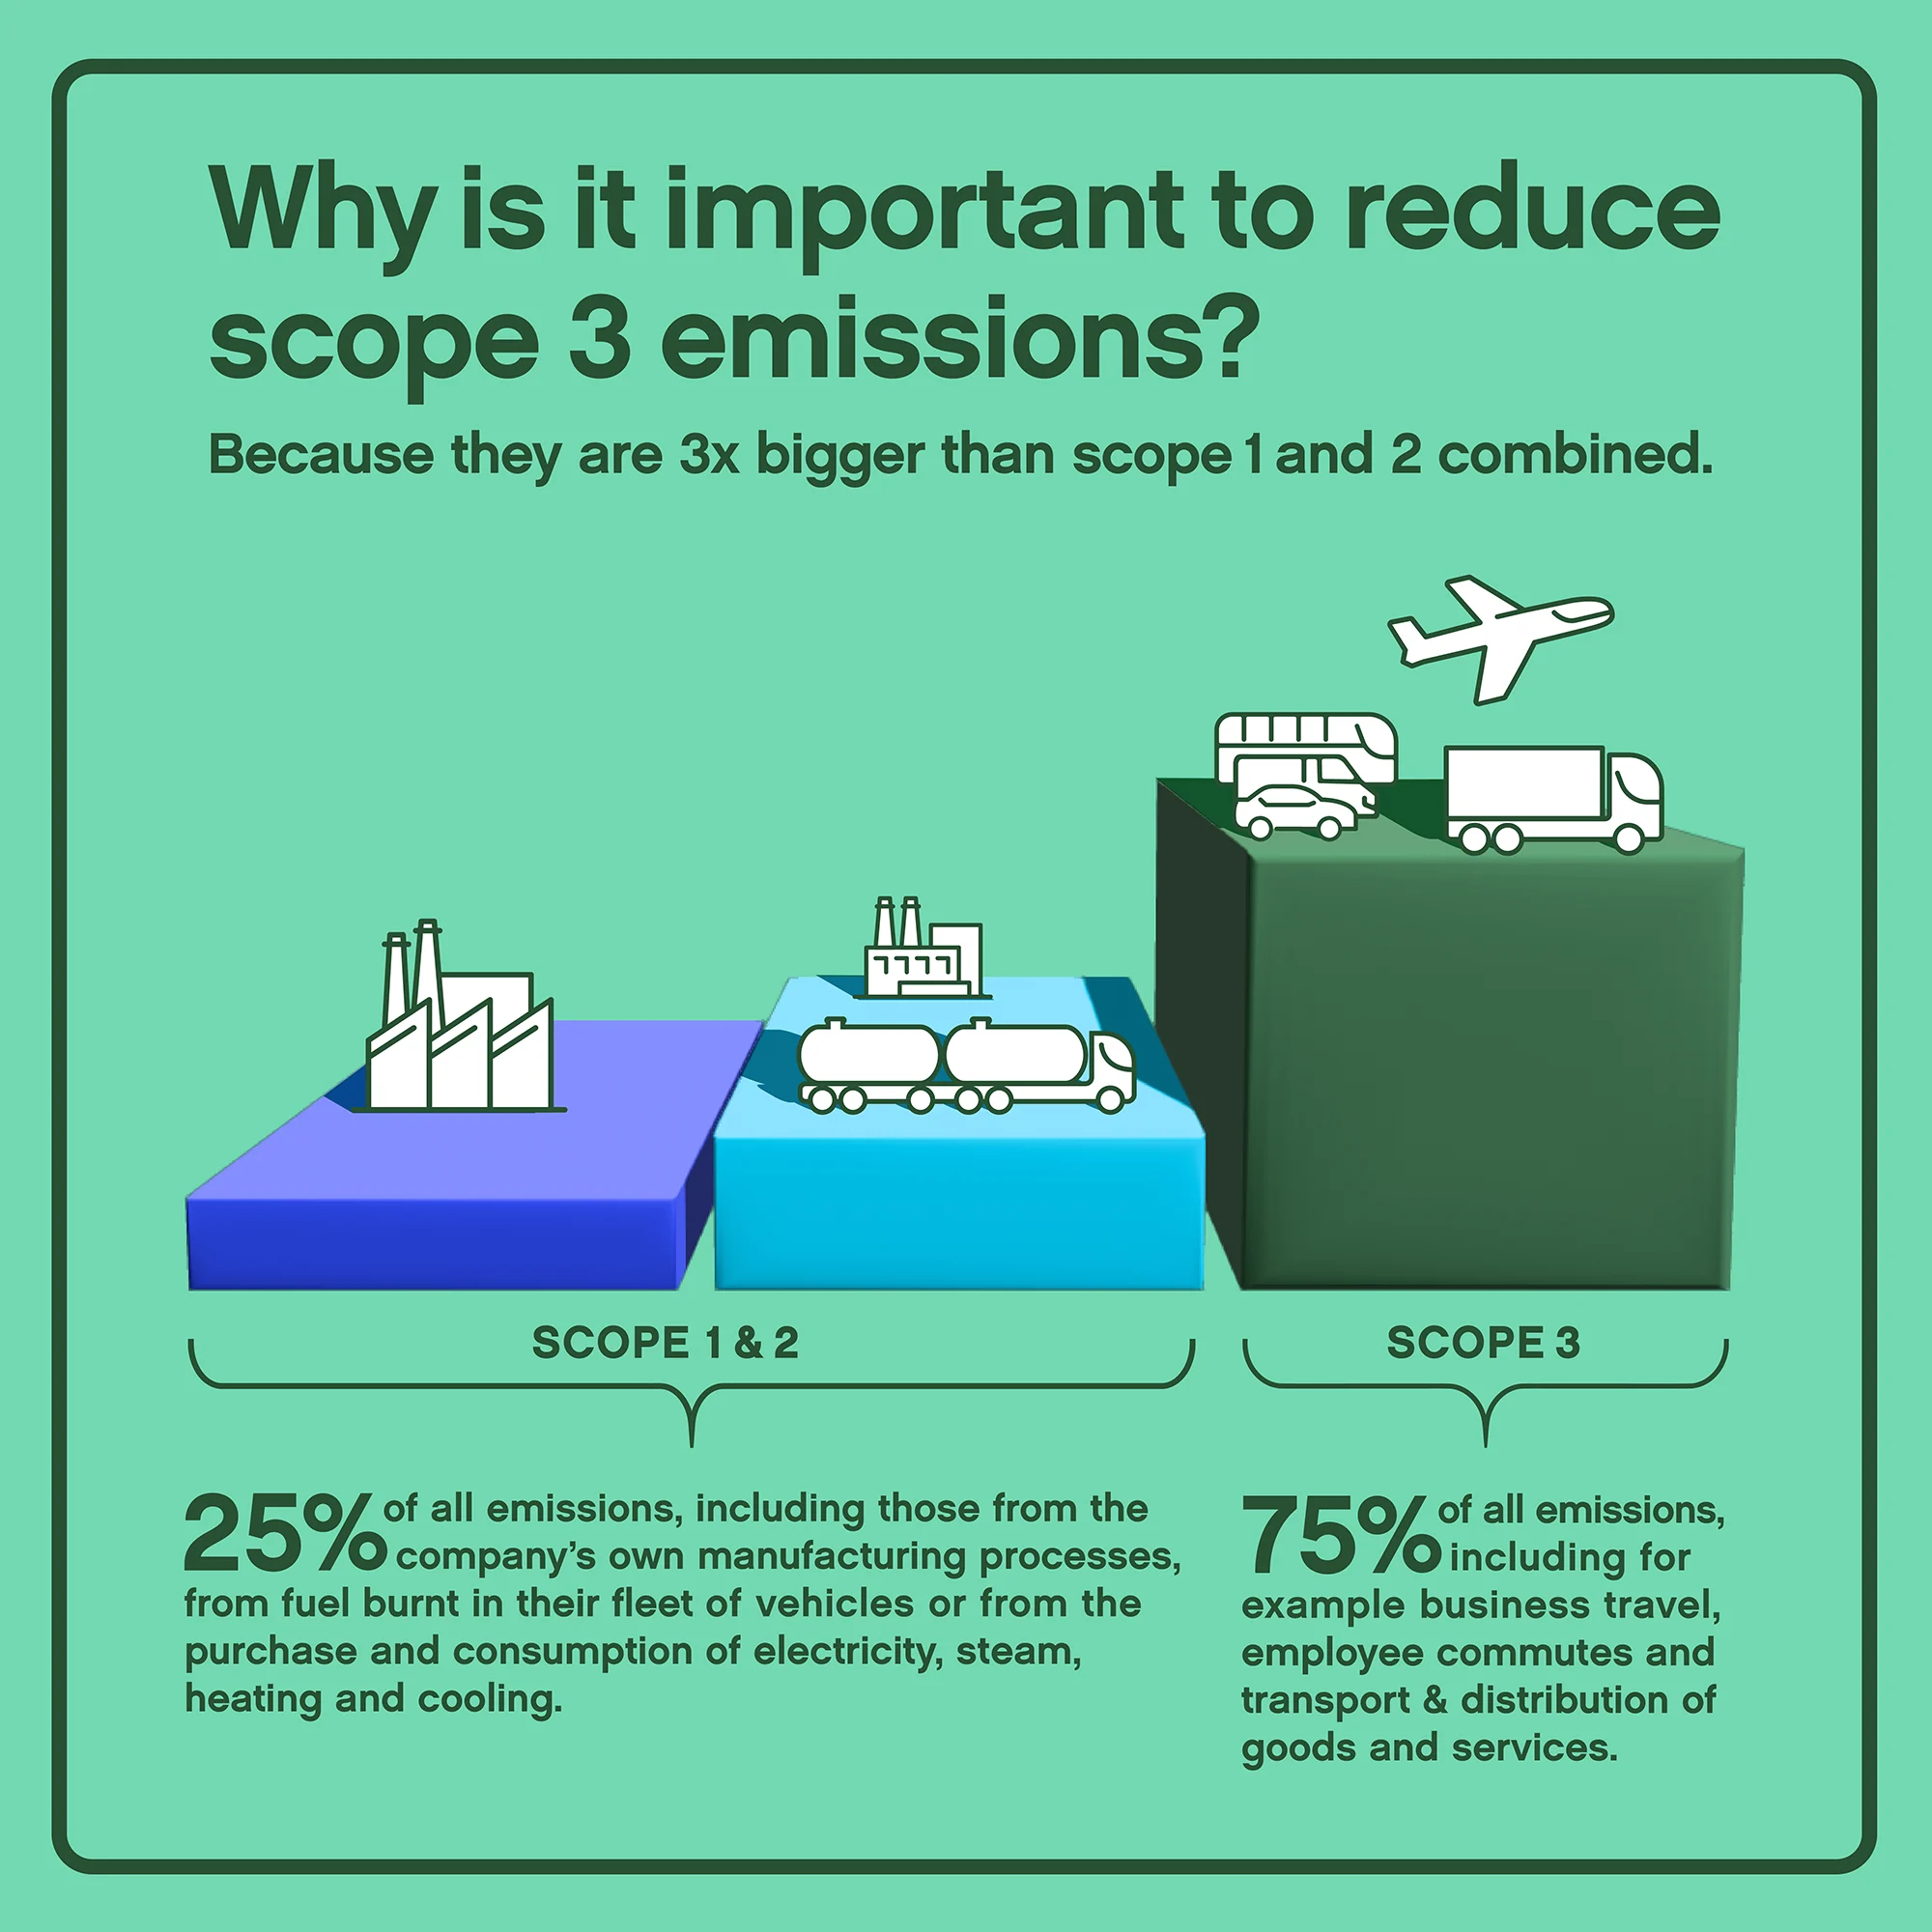 Why is it important to reduce scope 3 emissions